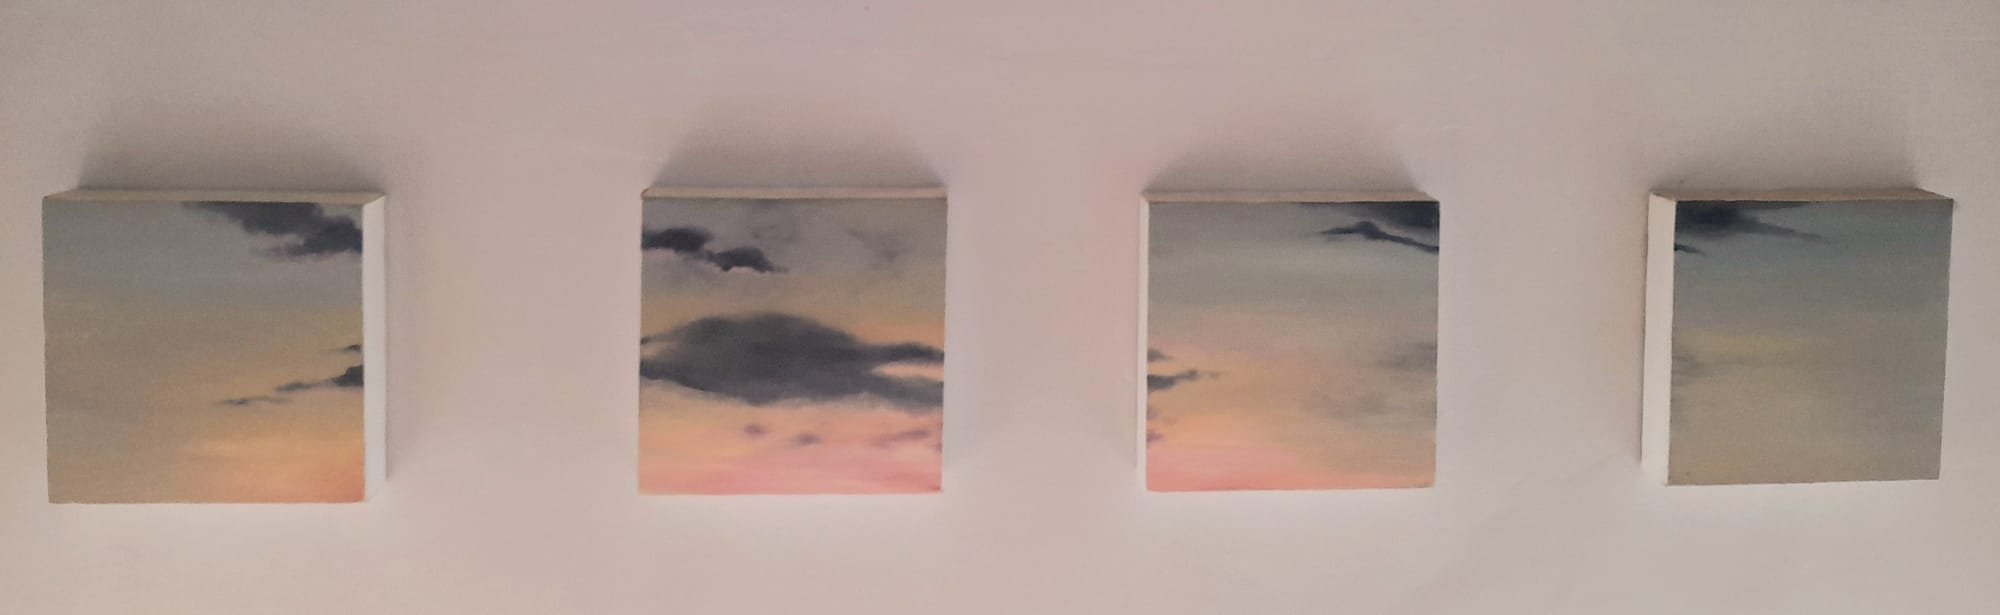 Evening sky 4 x box canvases